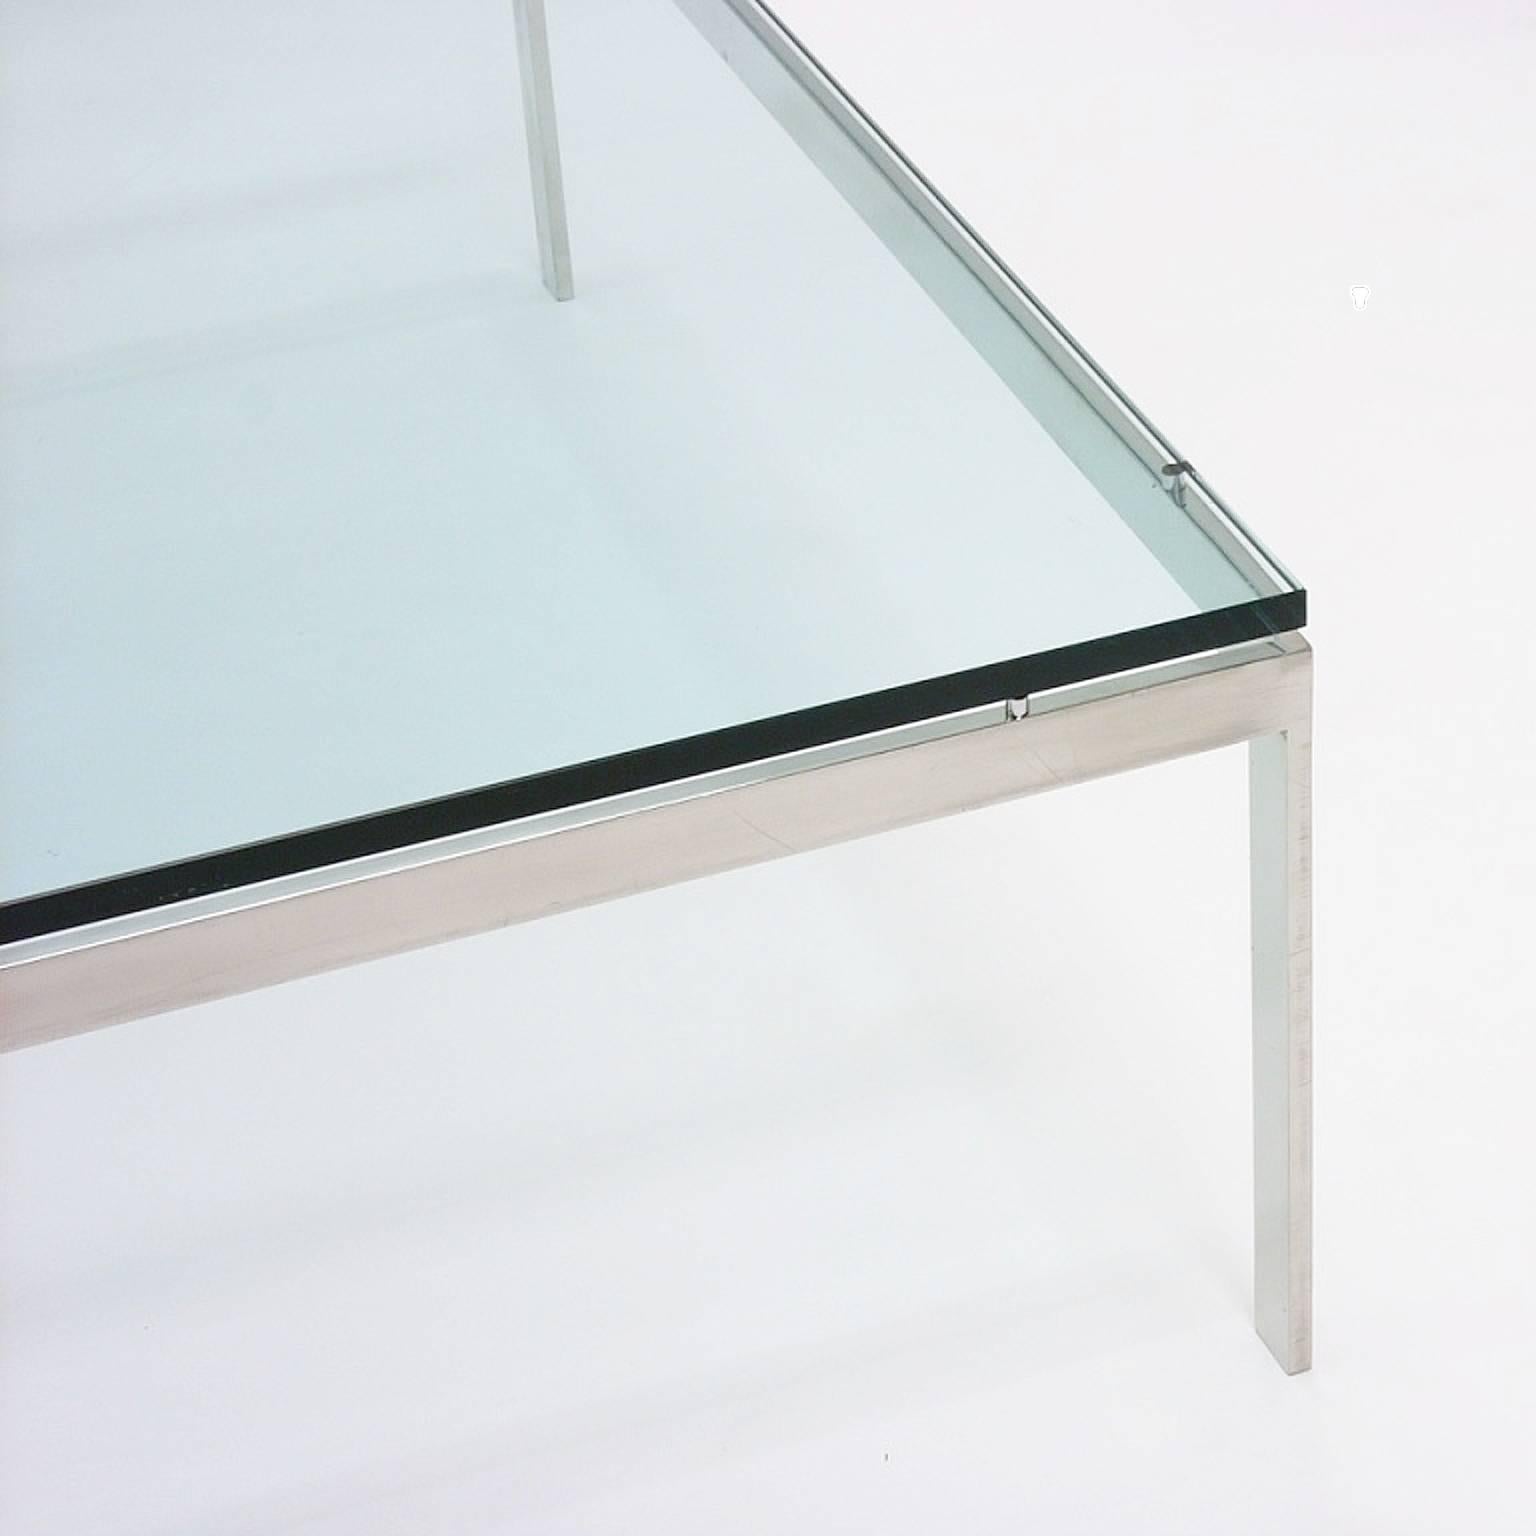 Mid-Century Modern Monumental Steel & Glass Coffee Table by Jacob Epstein for Cumberland Furniture